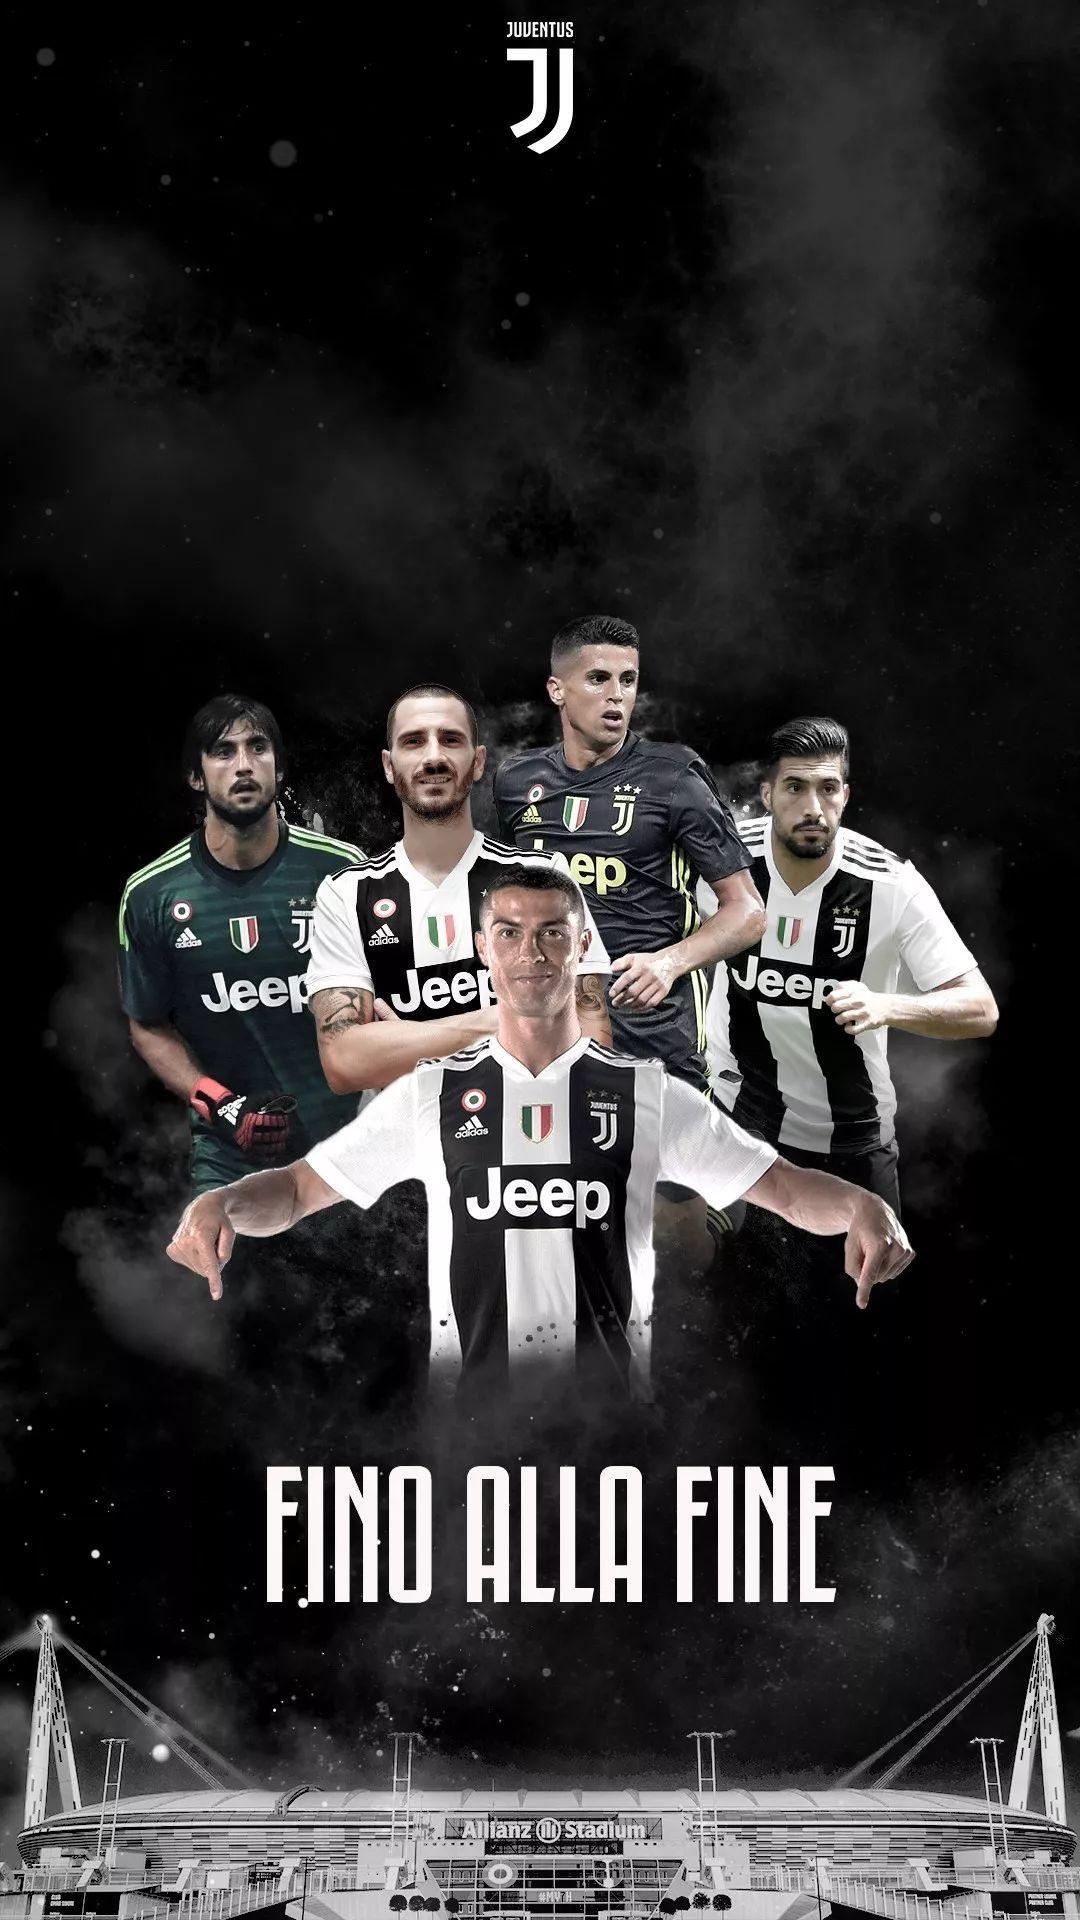 Cristiano Ronaldo Juventus Wallpapers HD for Android - APK ...